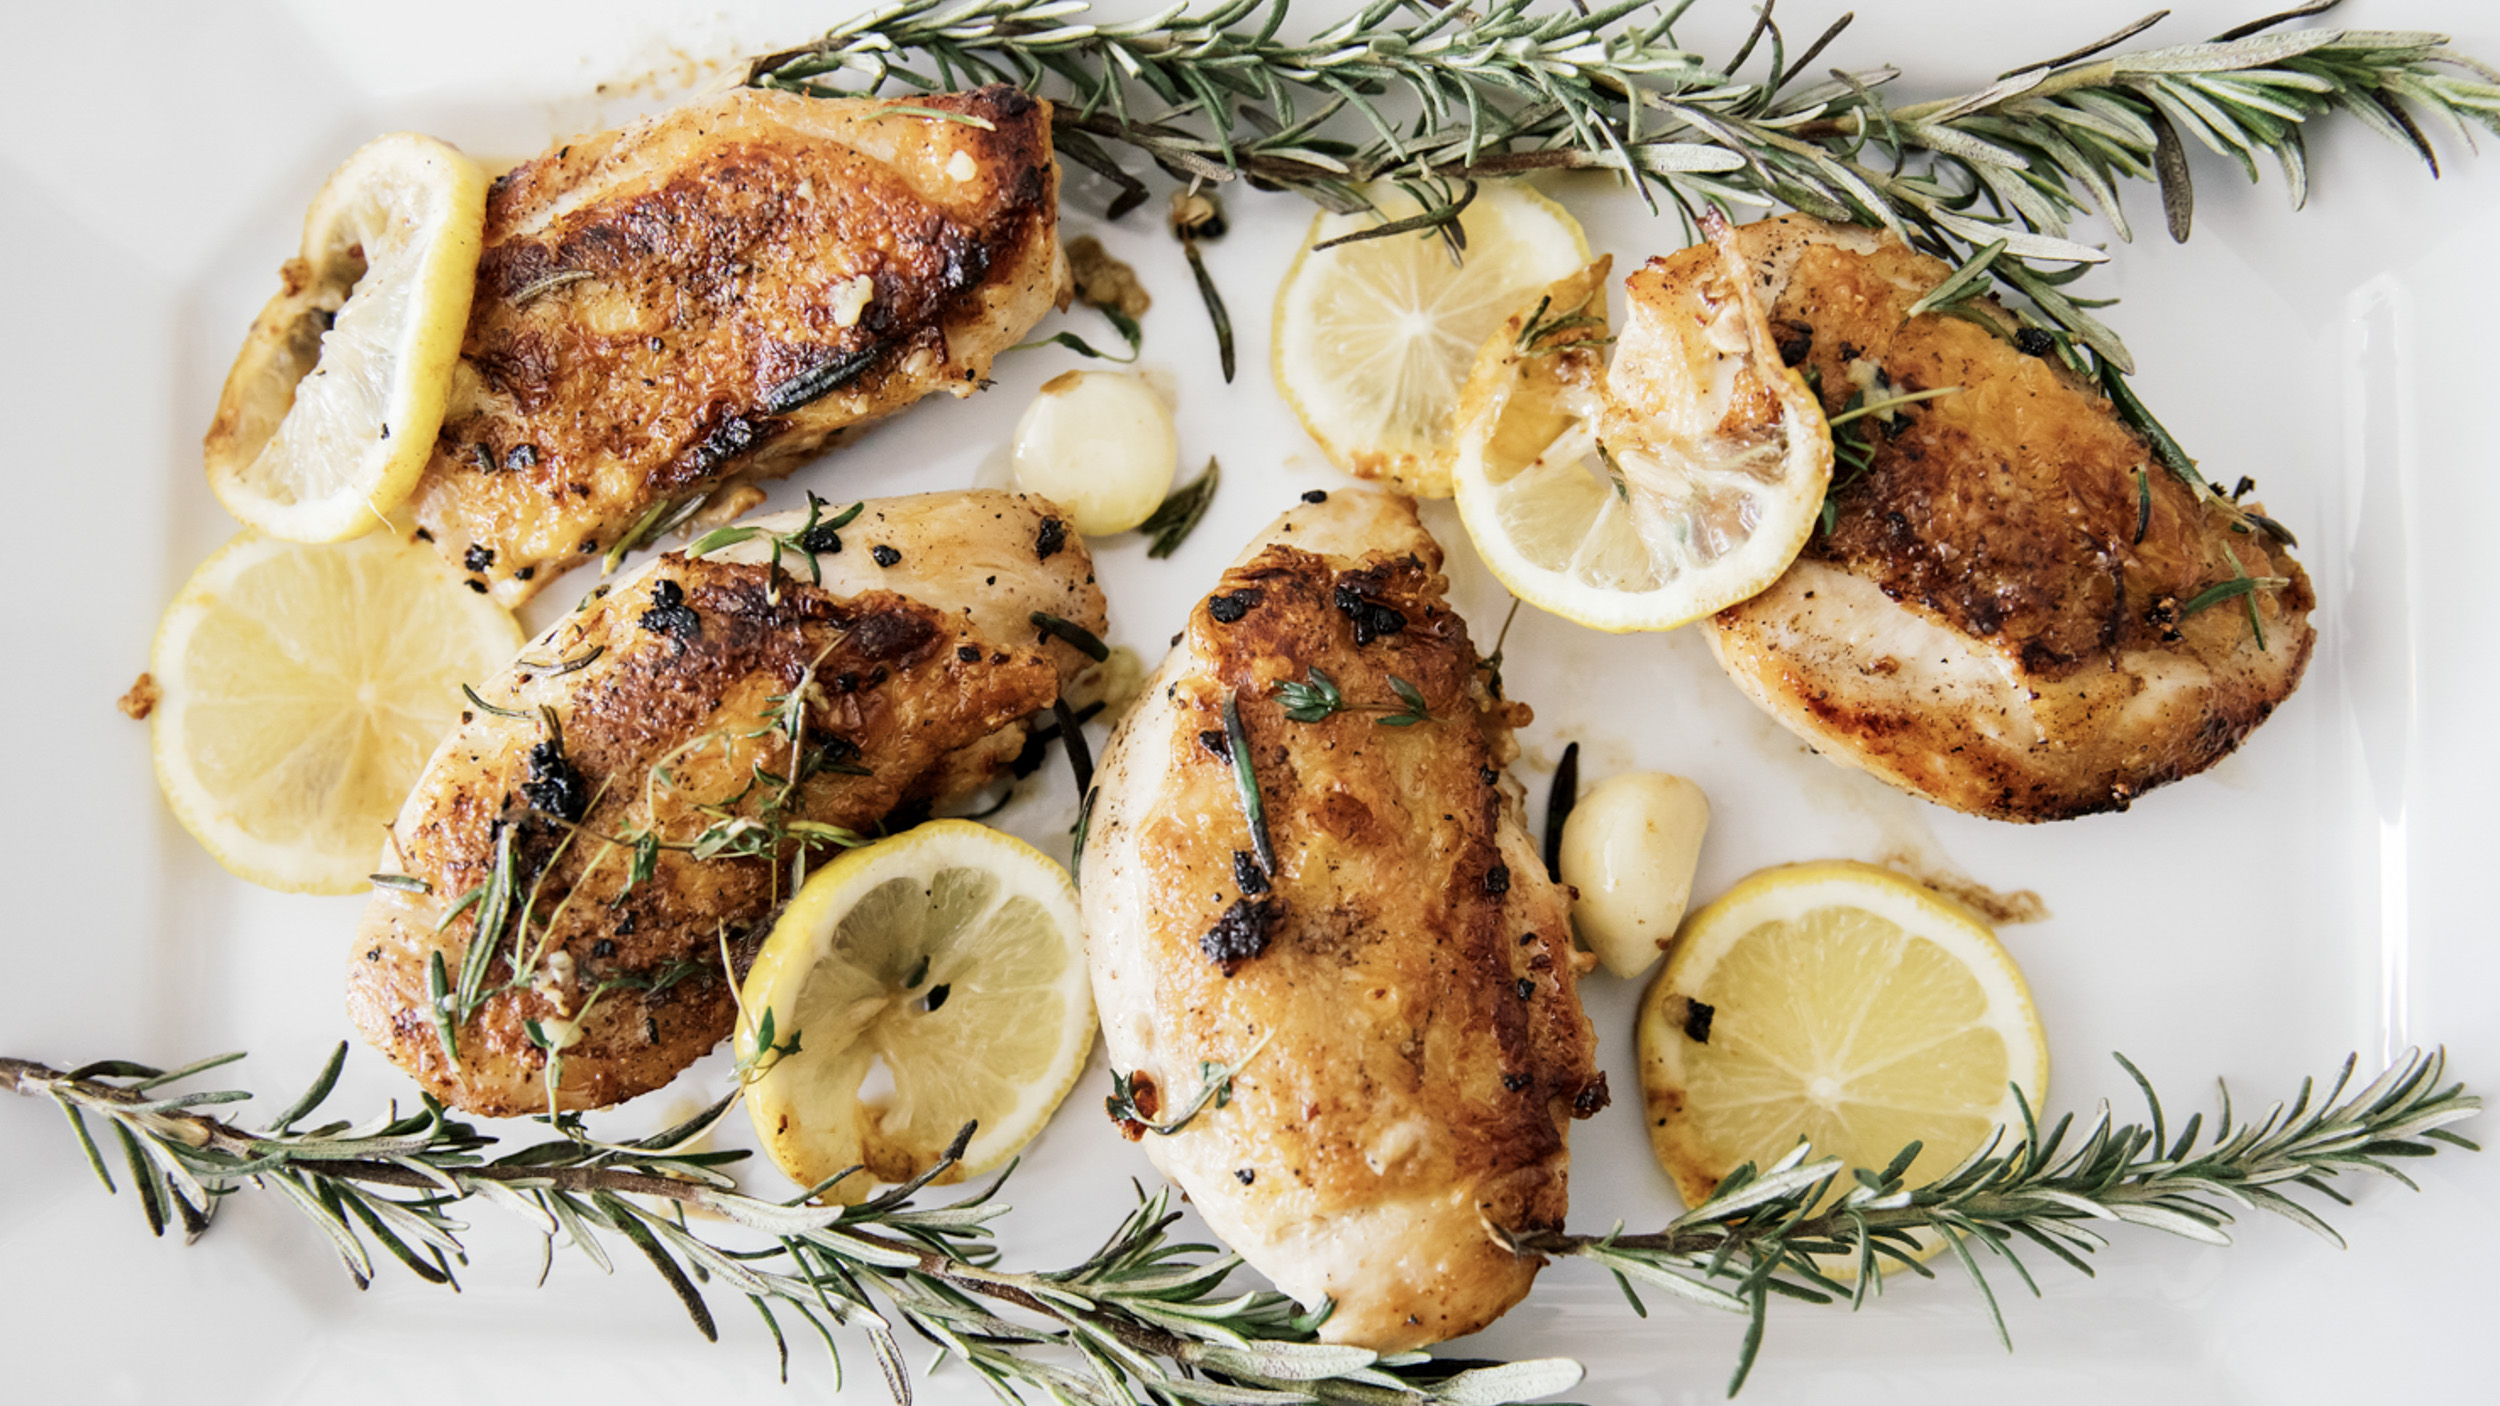 Skillet Chicken with Garlic Herb Butter | Happily Lisa by Lisa Breckenridge